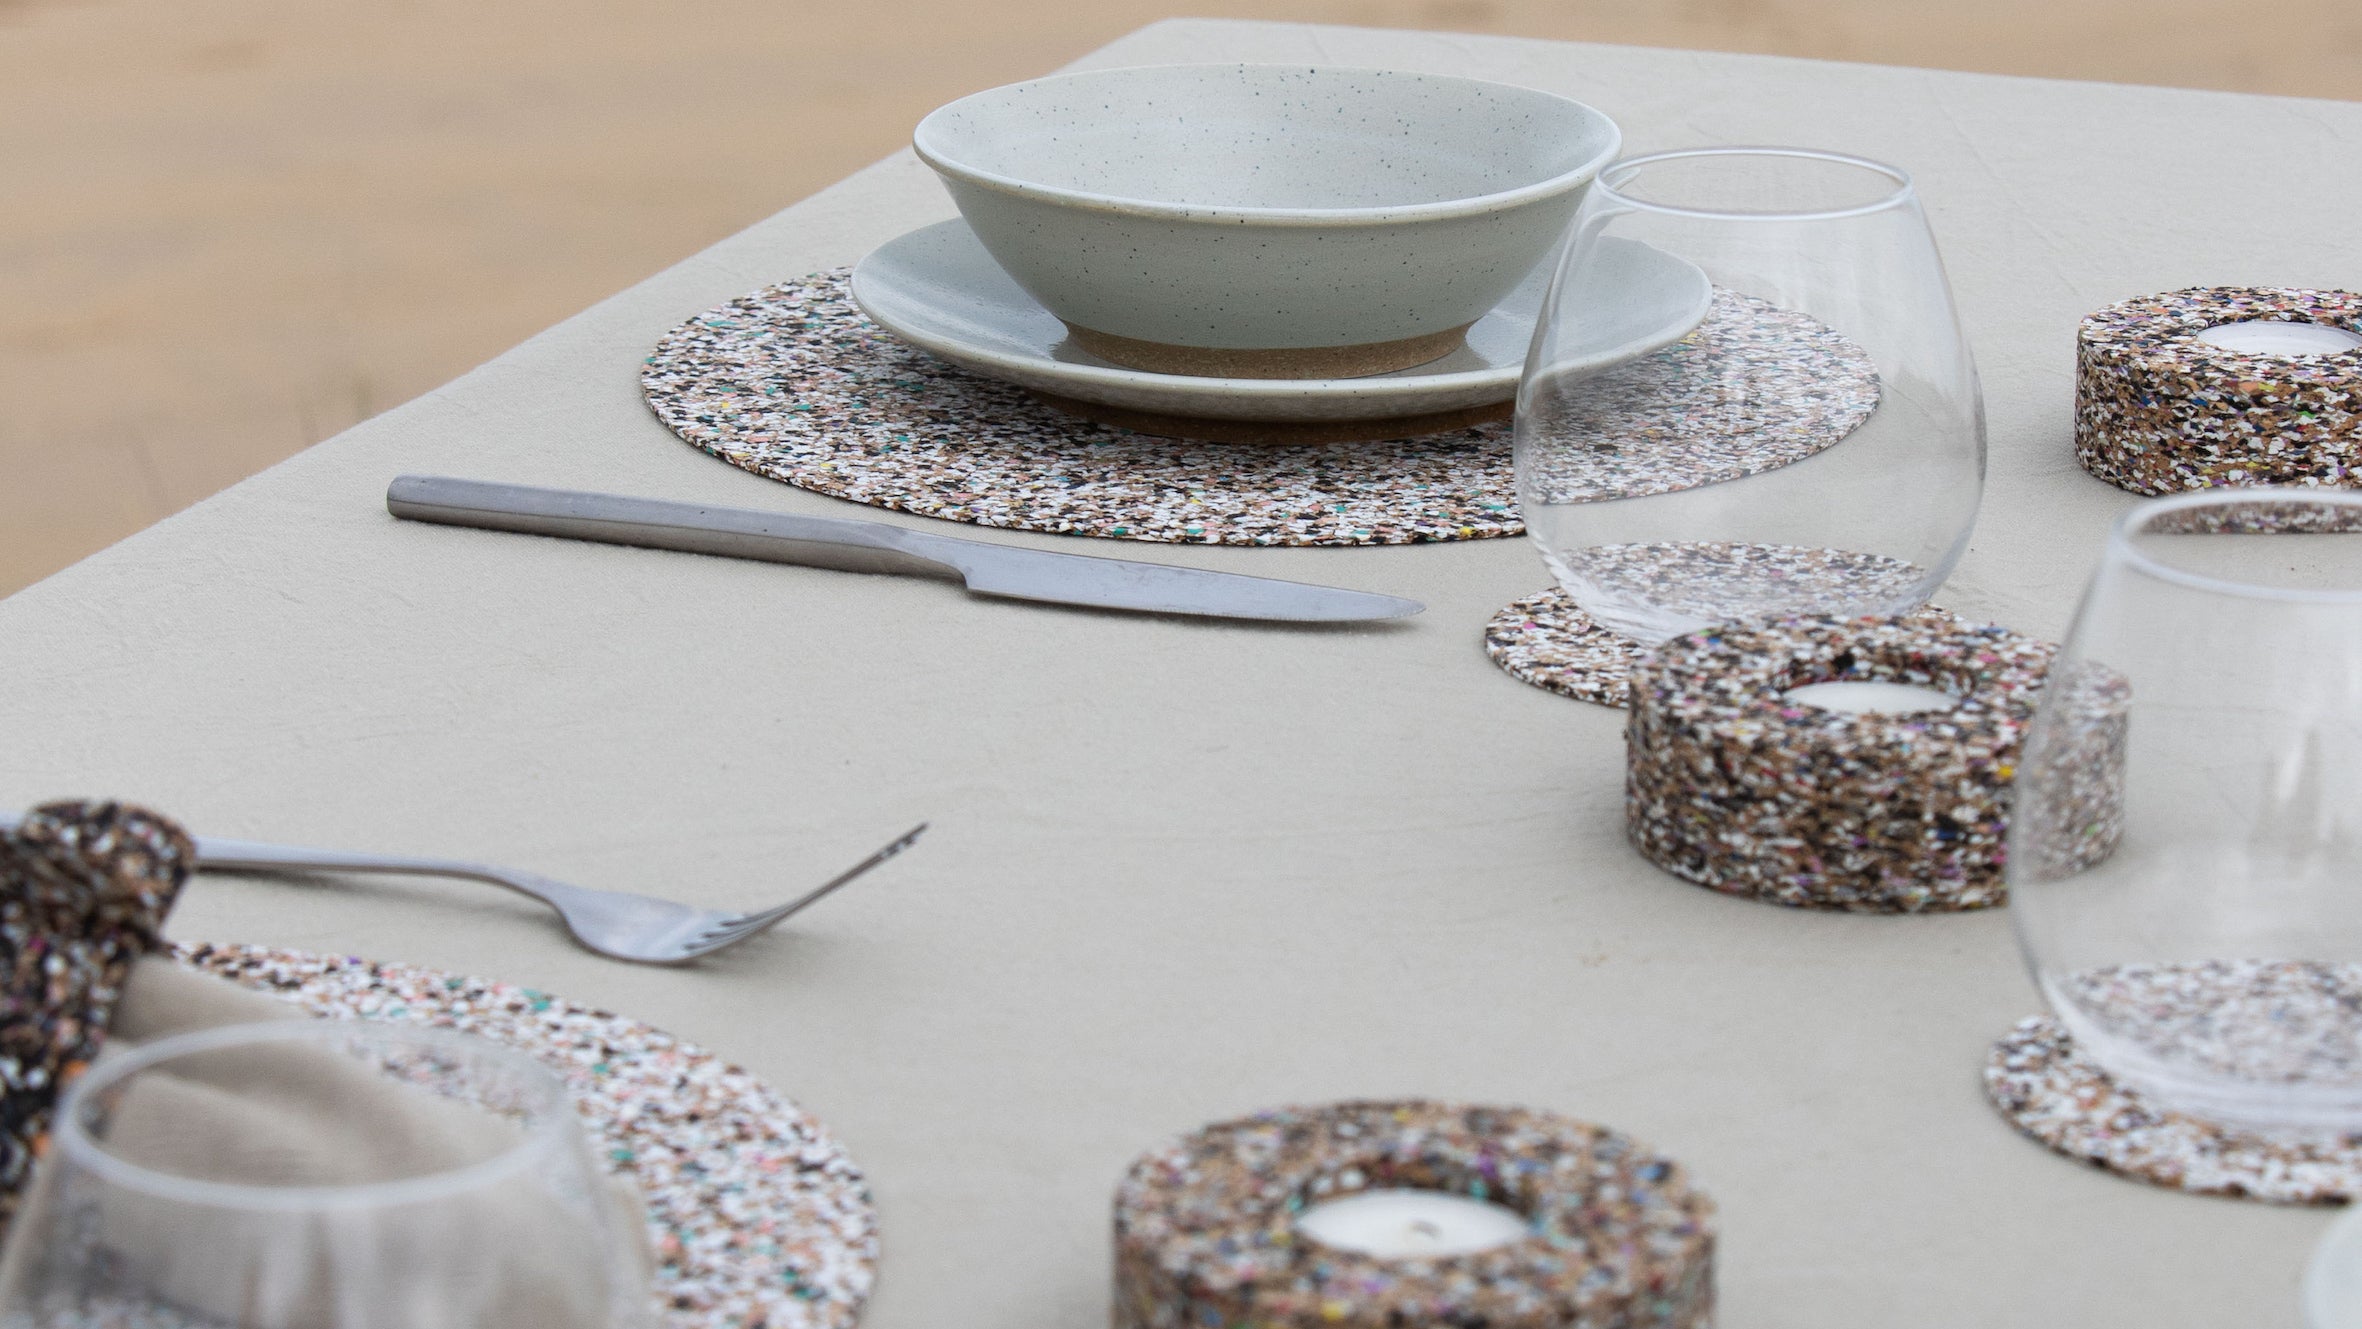 Beach clean placemats and tea lights